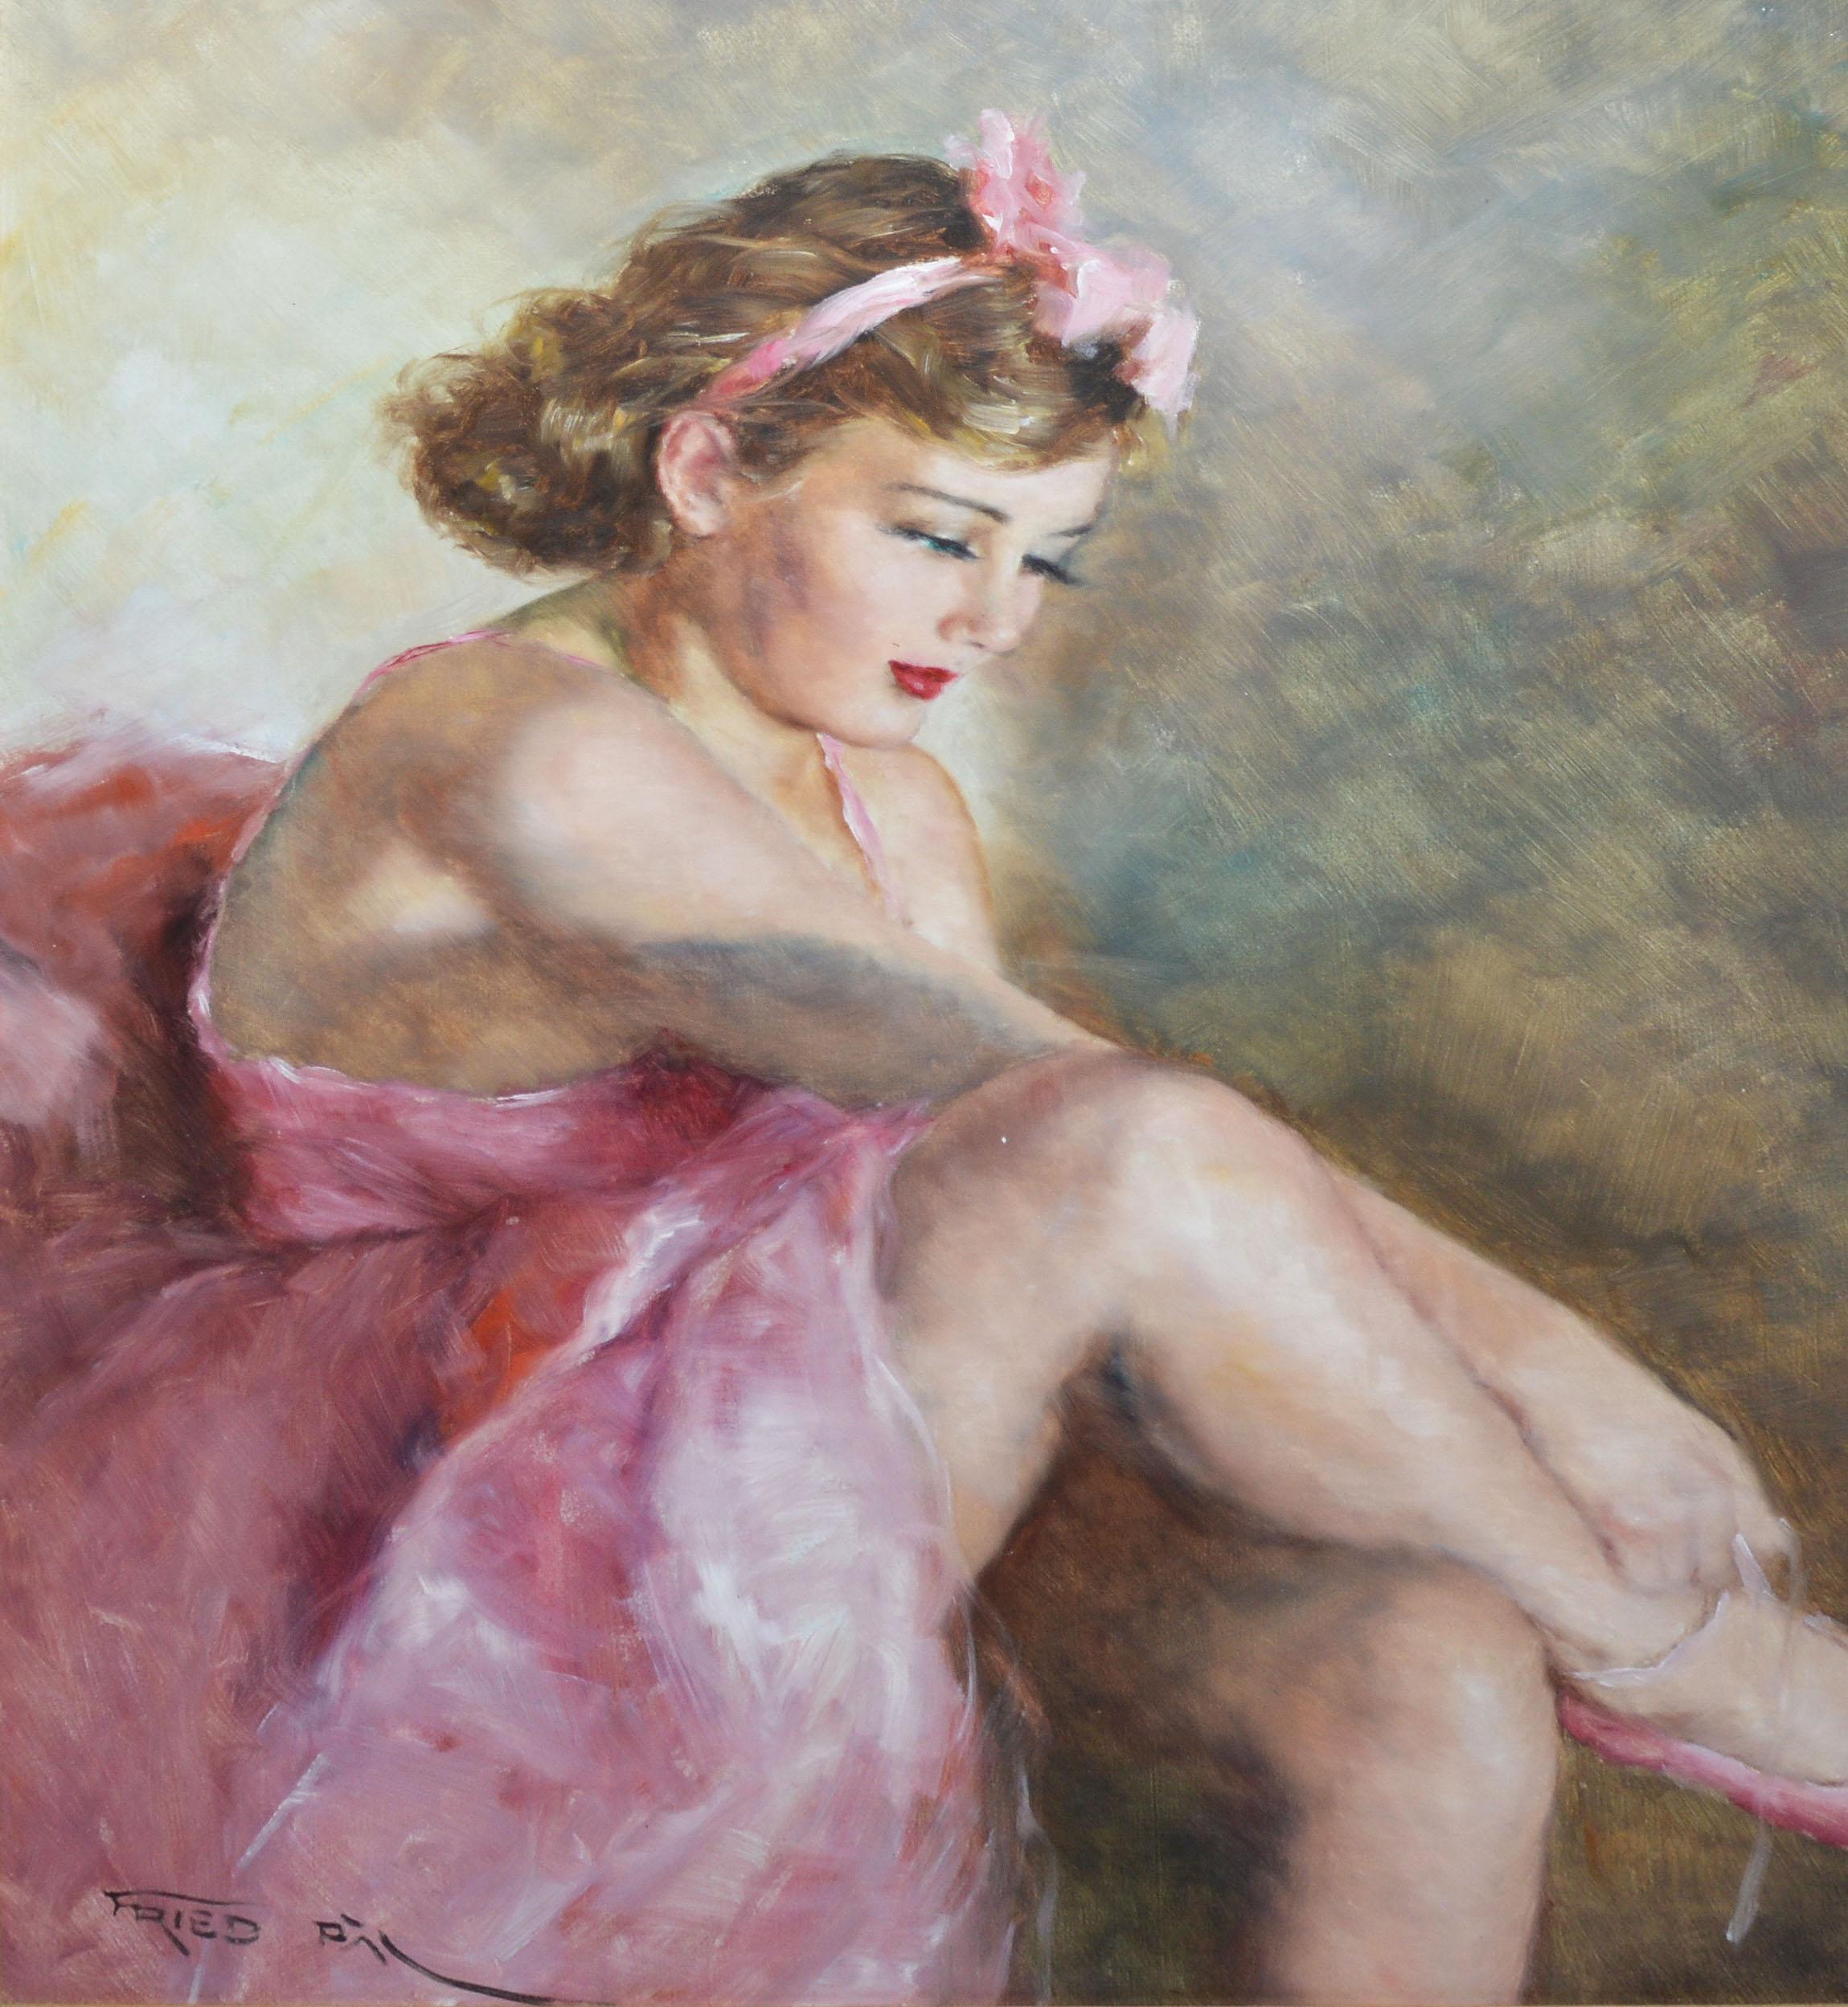 Antique impressionist ballerina dancer painting by Pal Fried  (1893 - 1976).  Oil on canvas, circa 1940.  Signed.  Displayed in a period giltwood frame.  Image, 31